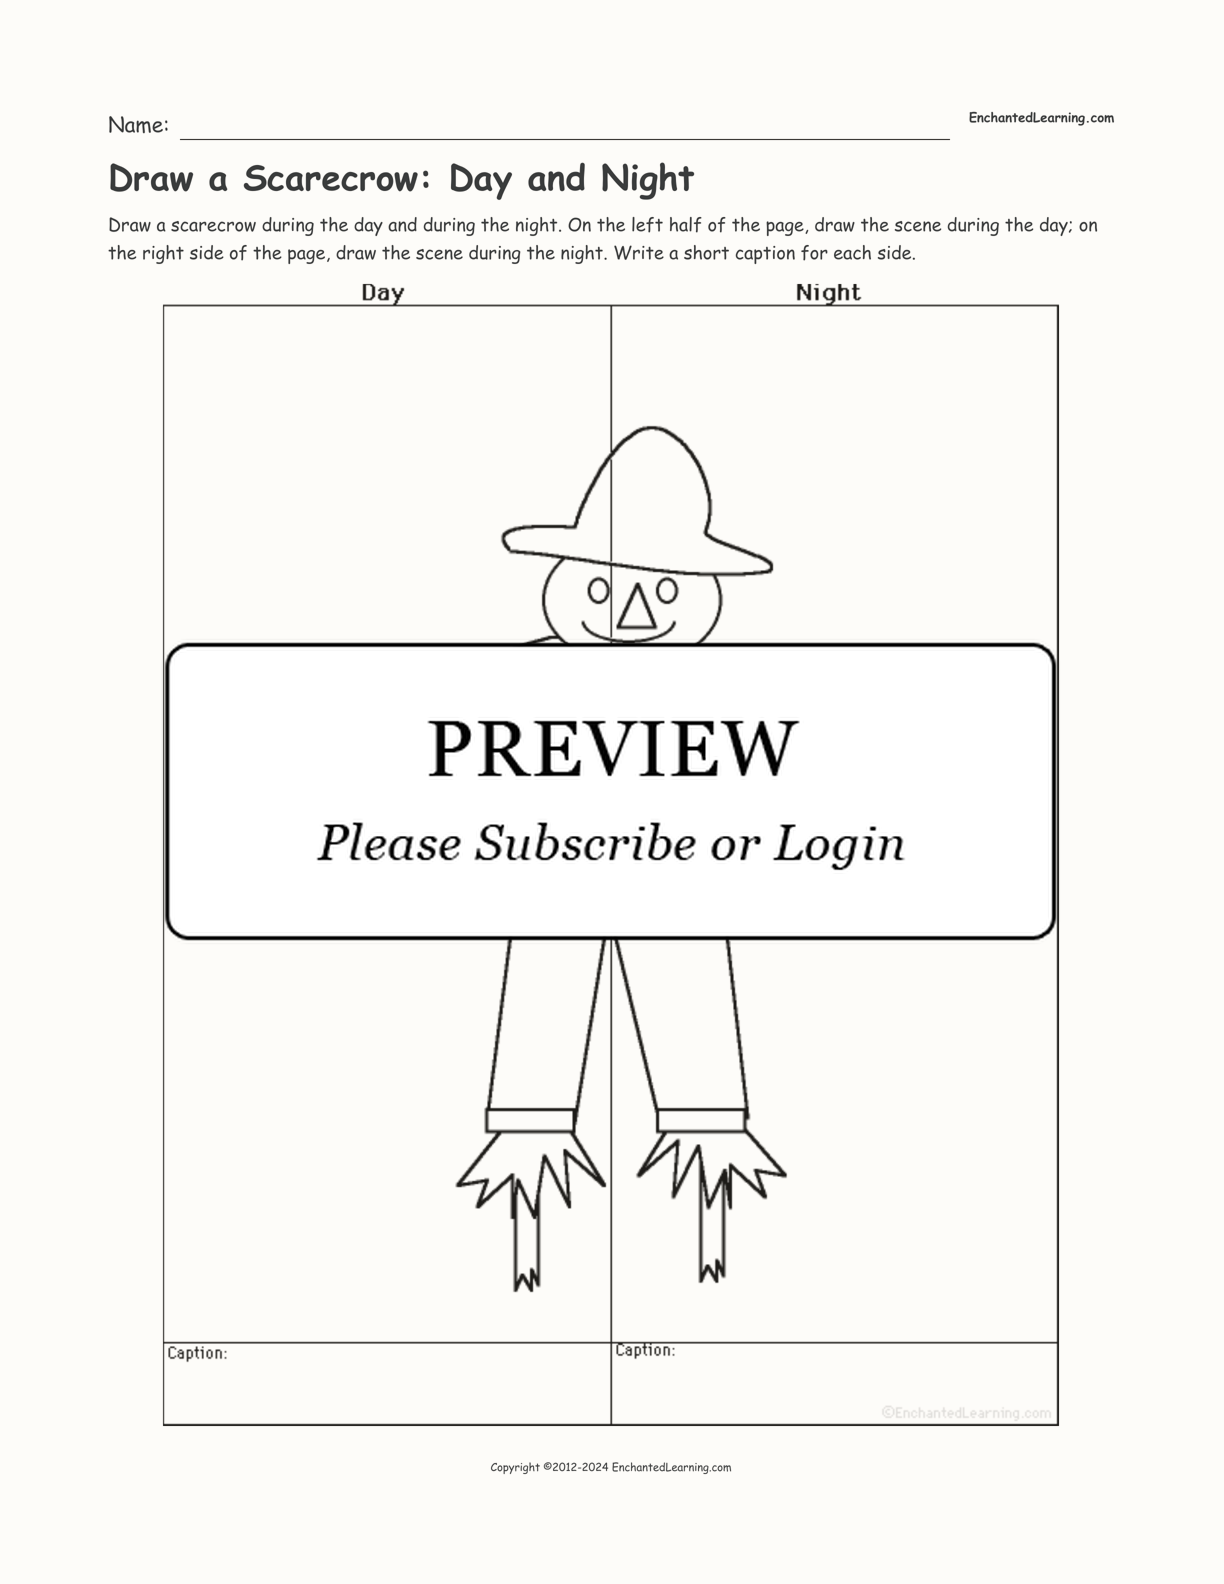 Draw a Scarecrow: Day and Night interactive worksheet page 1